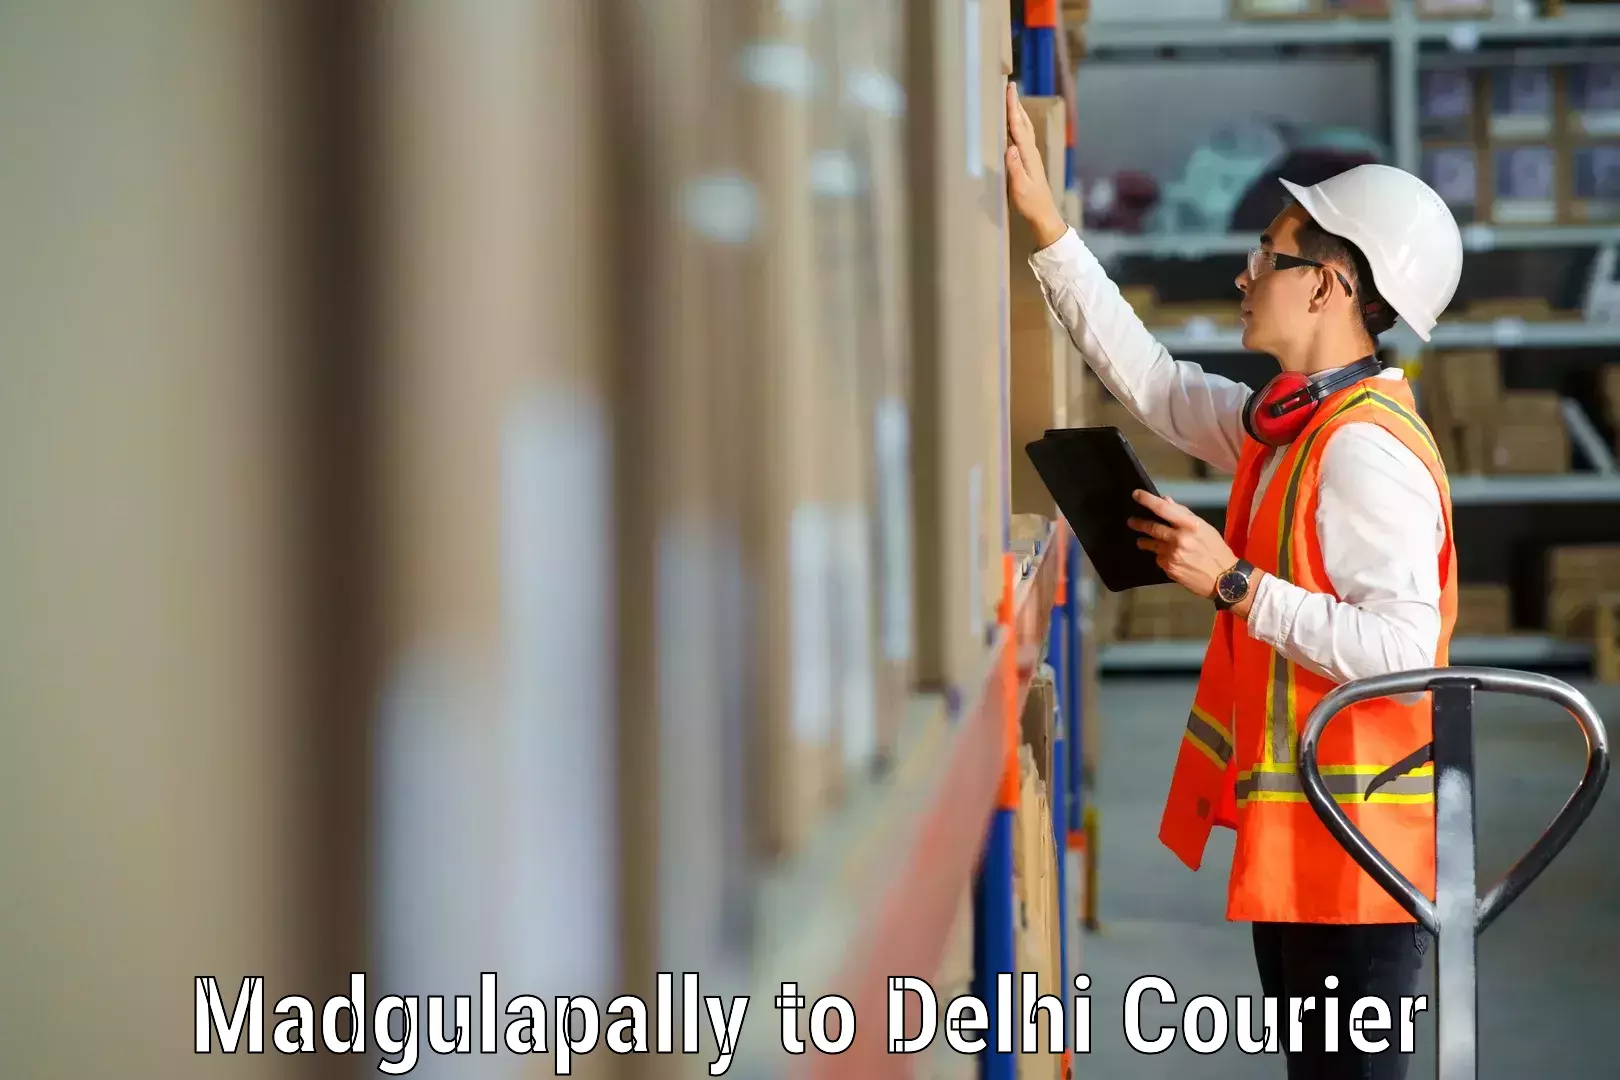 Furniture moving experts Madgulapally to Delhi Technological University DTU